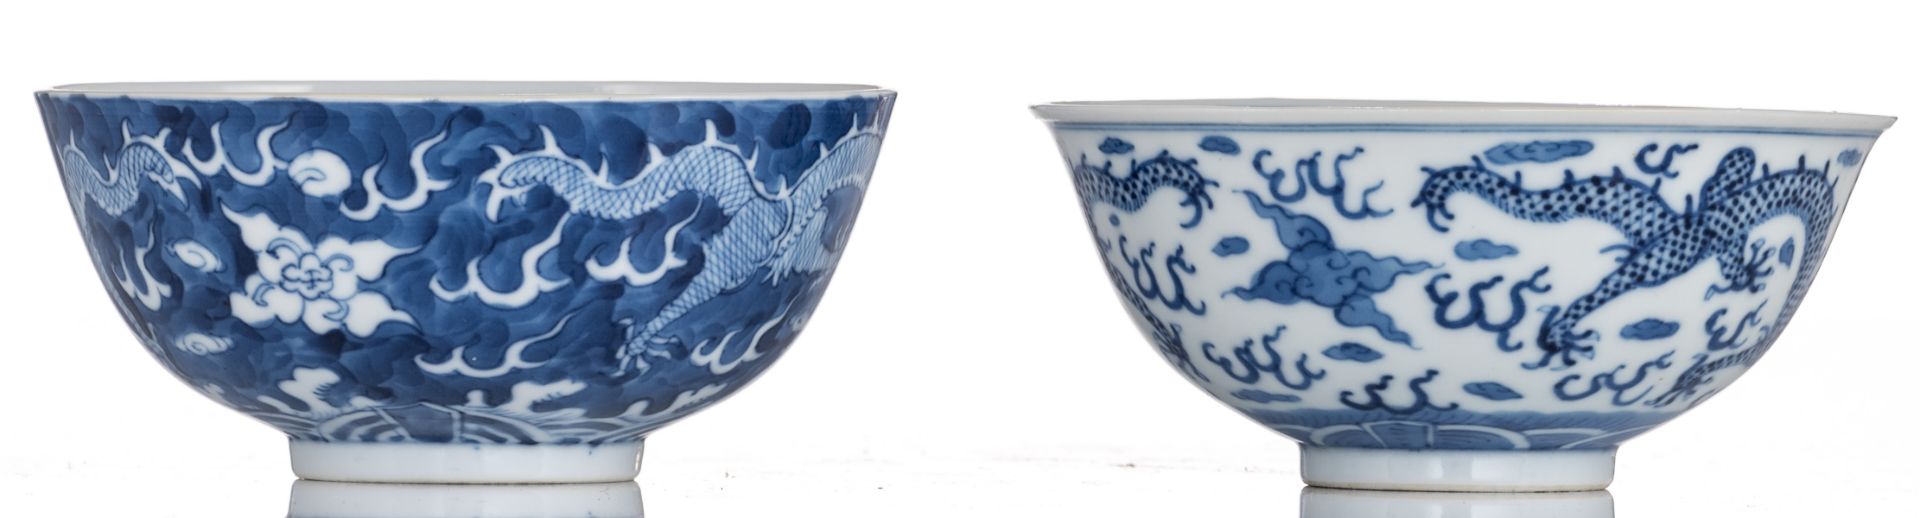 Two Chinese blue and white dragon decorated bowls, with a Kangxi mark, H 5,5 - 6 - ø 12,5 - 13 cm - Bild 4 aus 7